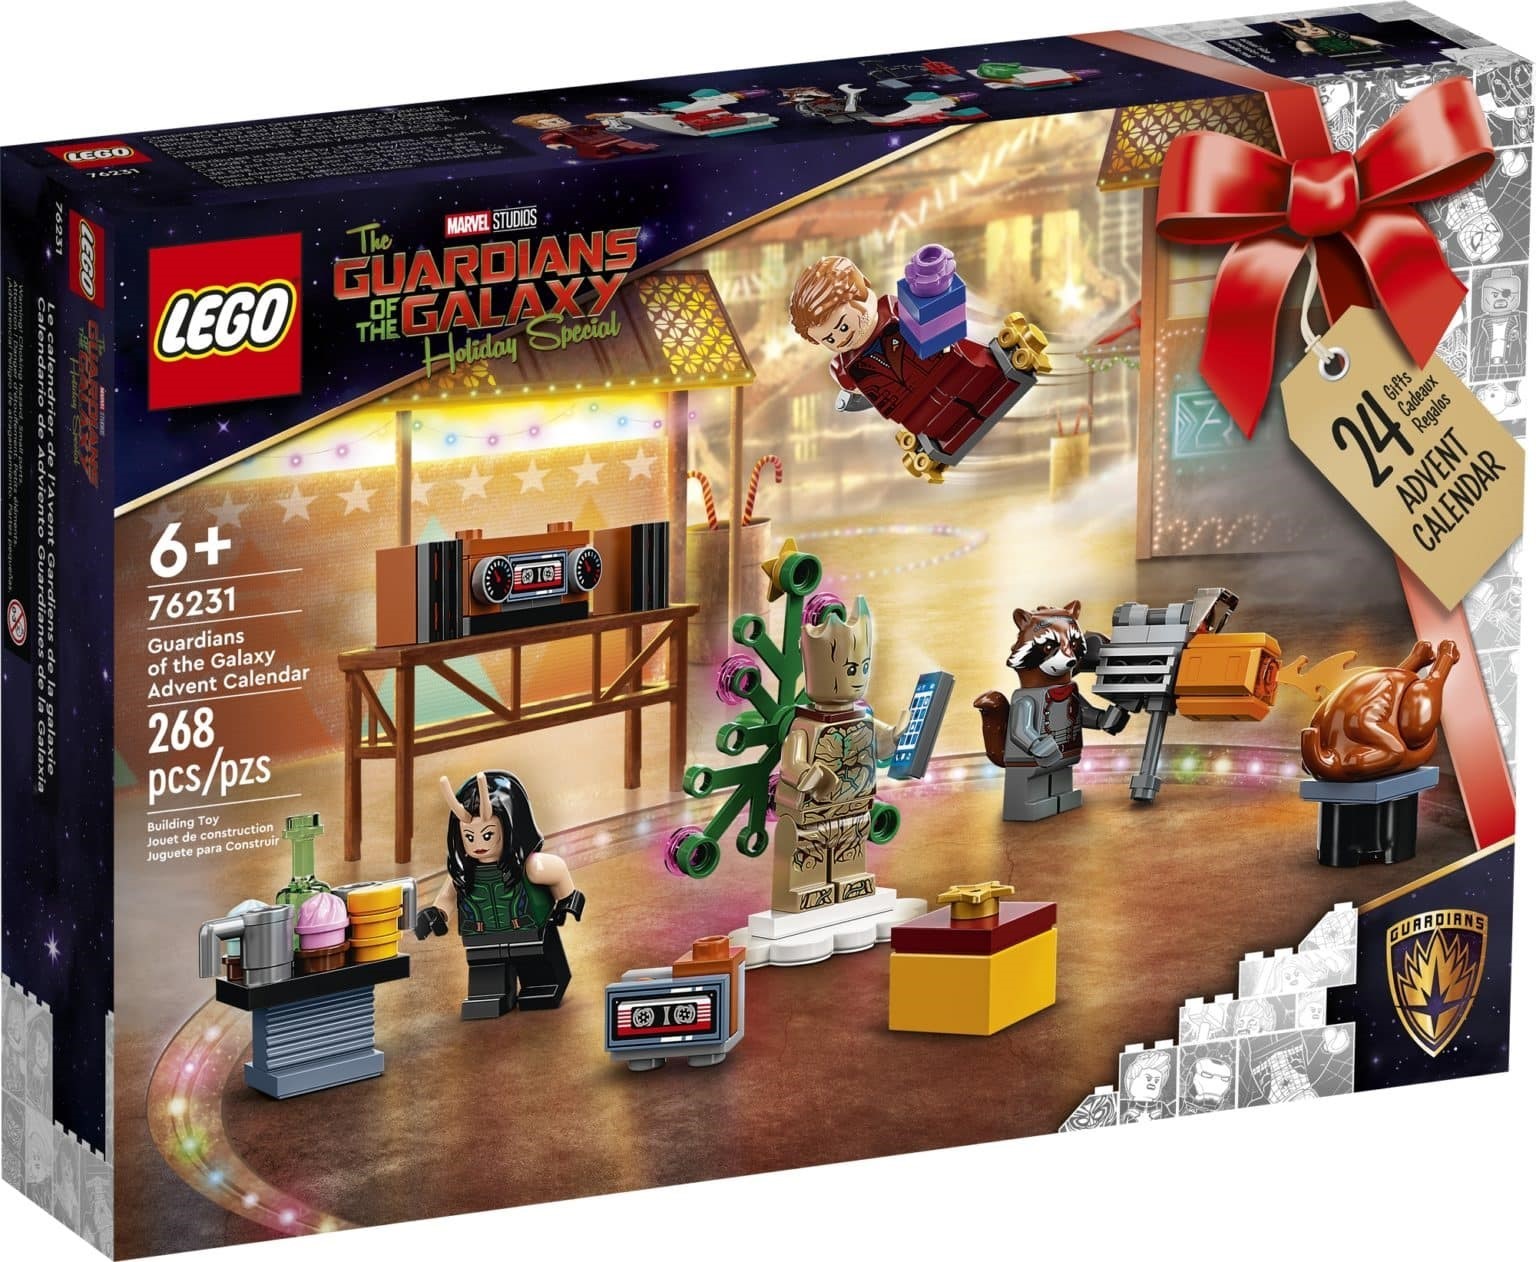 Every single LEGO DC set released in 2022 - September update